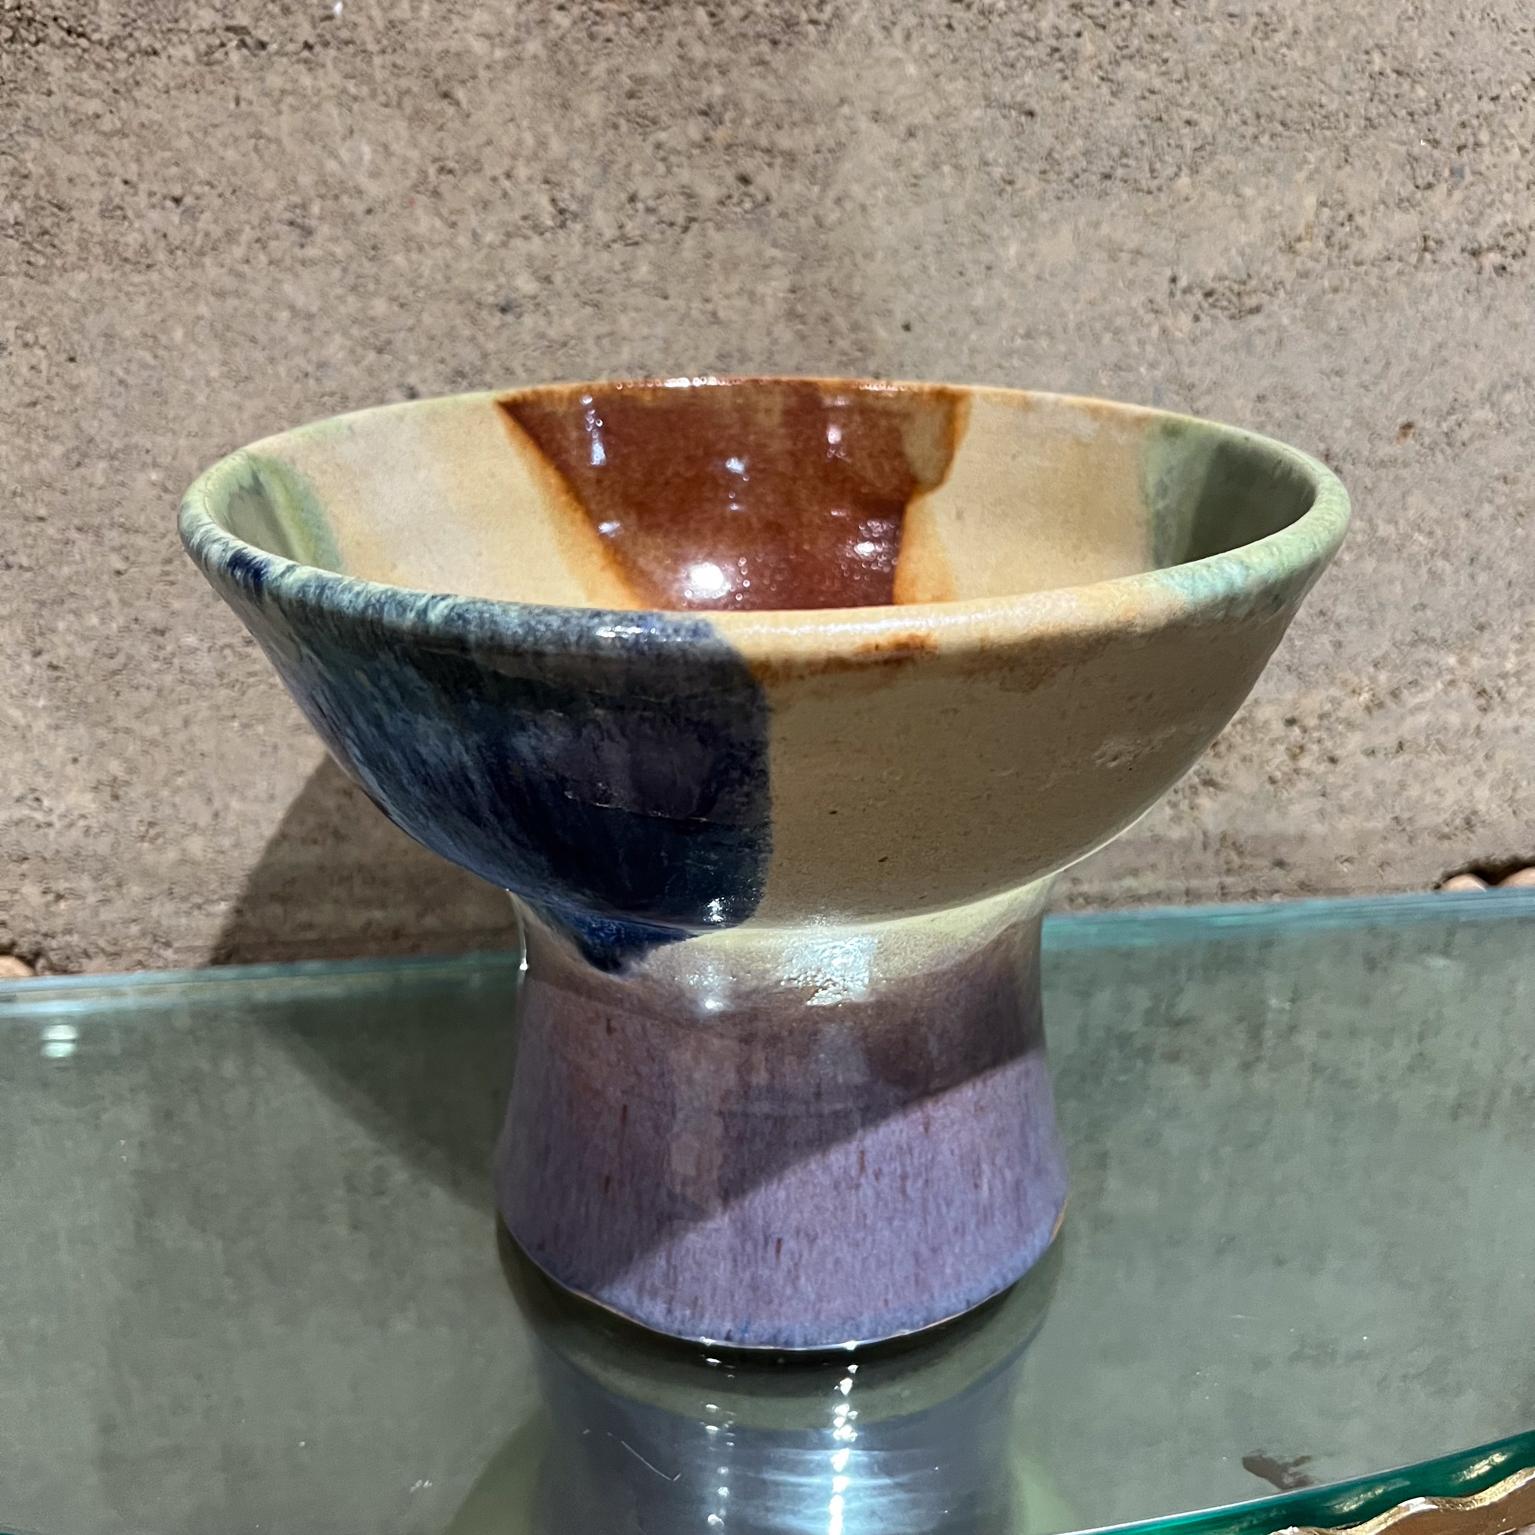 1970s Art Pottery Drip Glazed Pedestal Bowl
7 h x 9.13 diameter
Preowned original vintage condition.
Refer to images listed